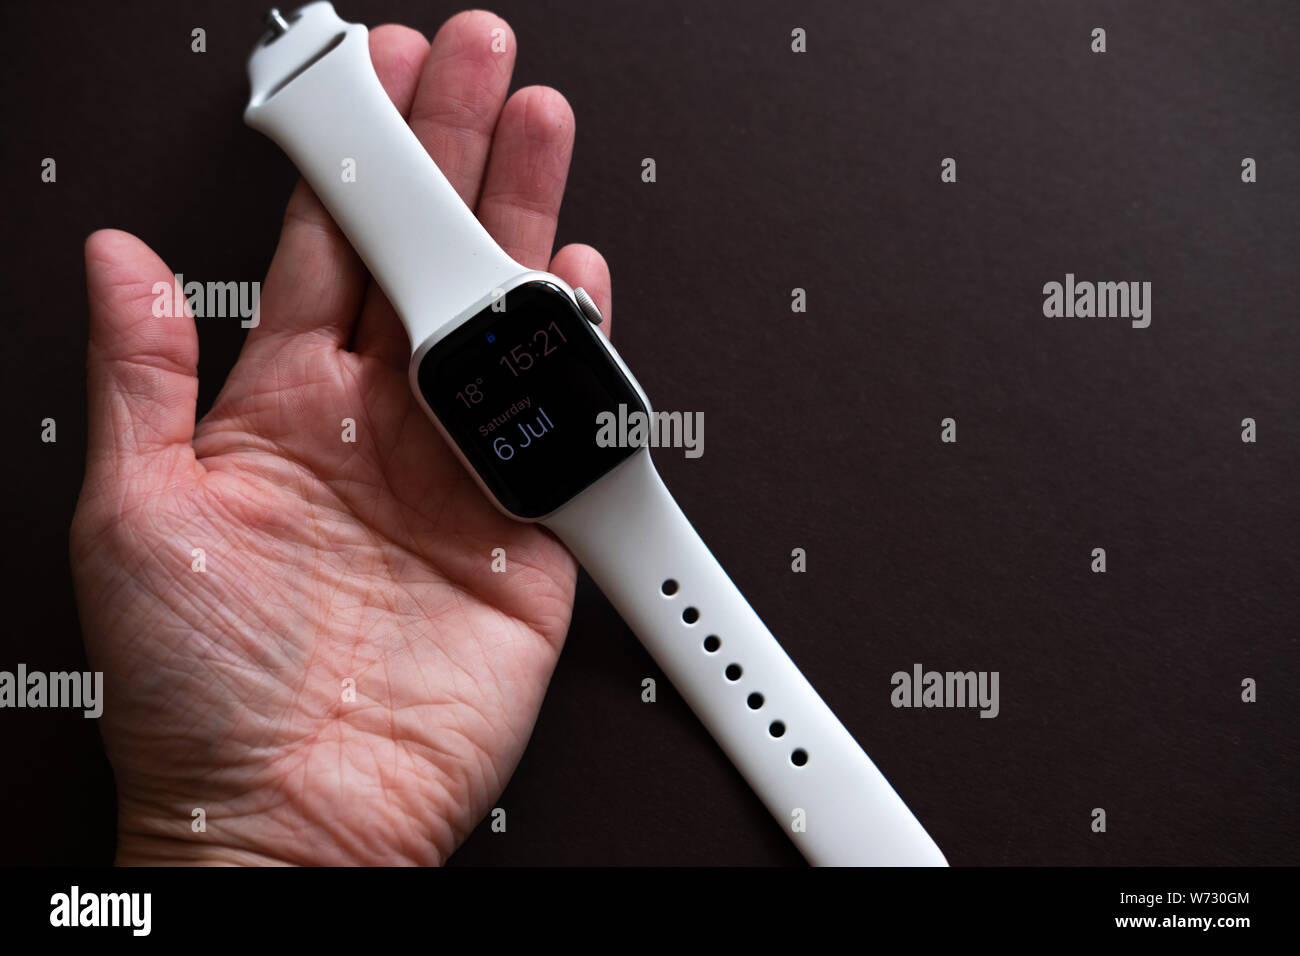 Chekhov, Russia - July 19, 2019: Apple Watch Series 4 white color with hand. A new watch from an Apple company closeup isolated on dark background Stock Photo